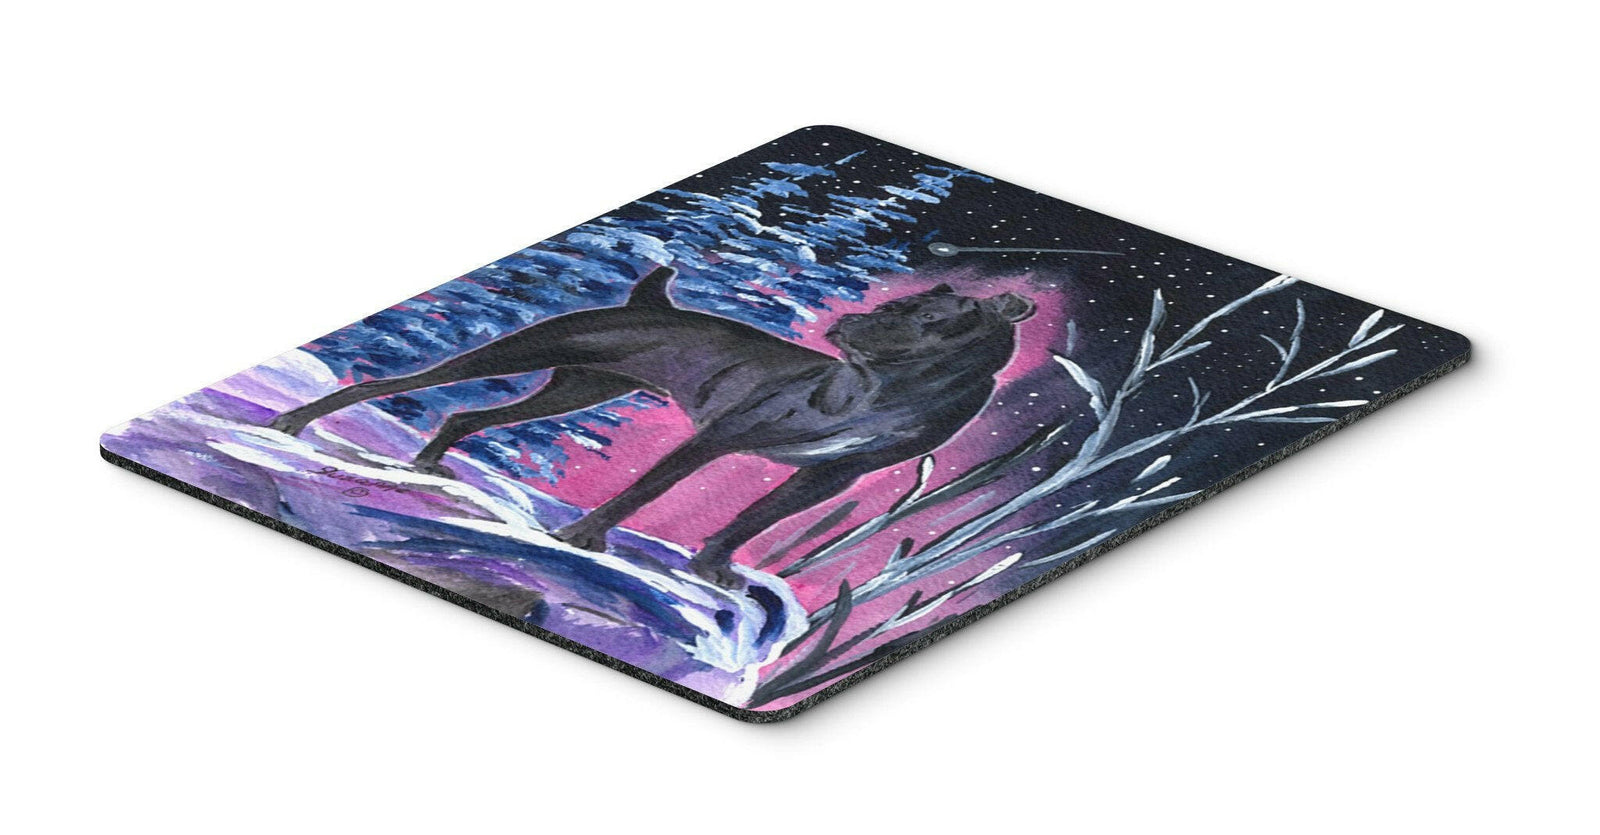 Starry Night Cane Corso Mouse Pad / Hot Pad / Trivet by Caroline's Treasures